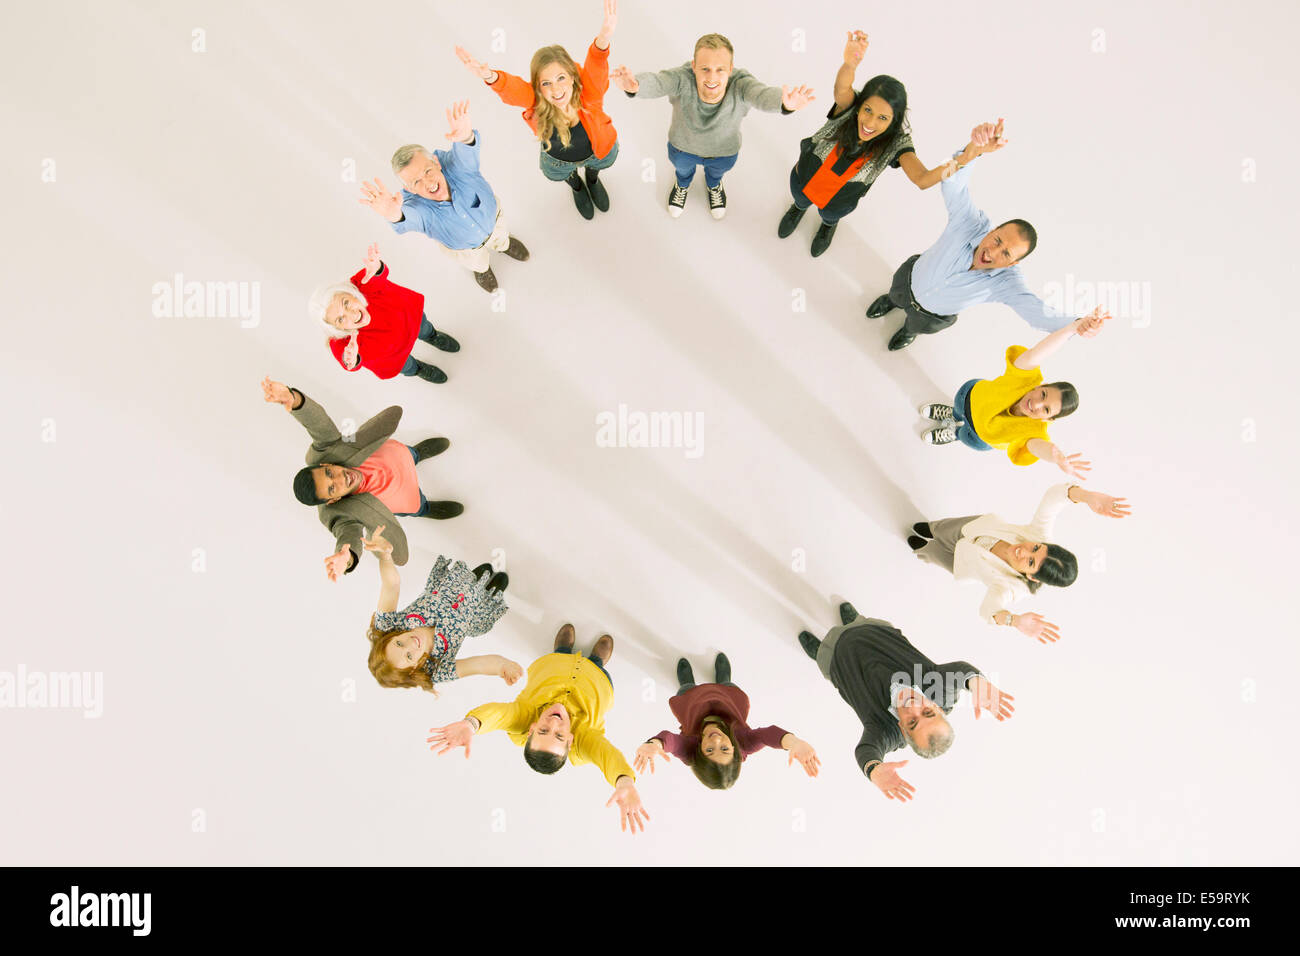 Business people with arms raised in circle Stock Photo